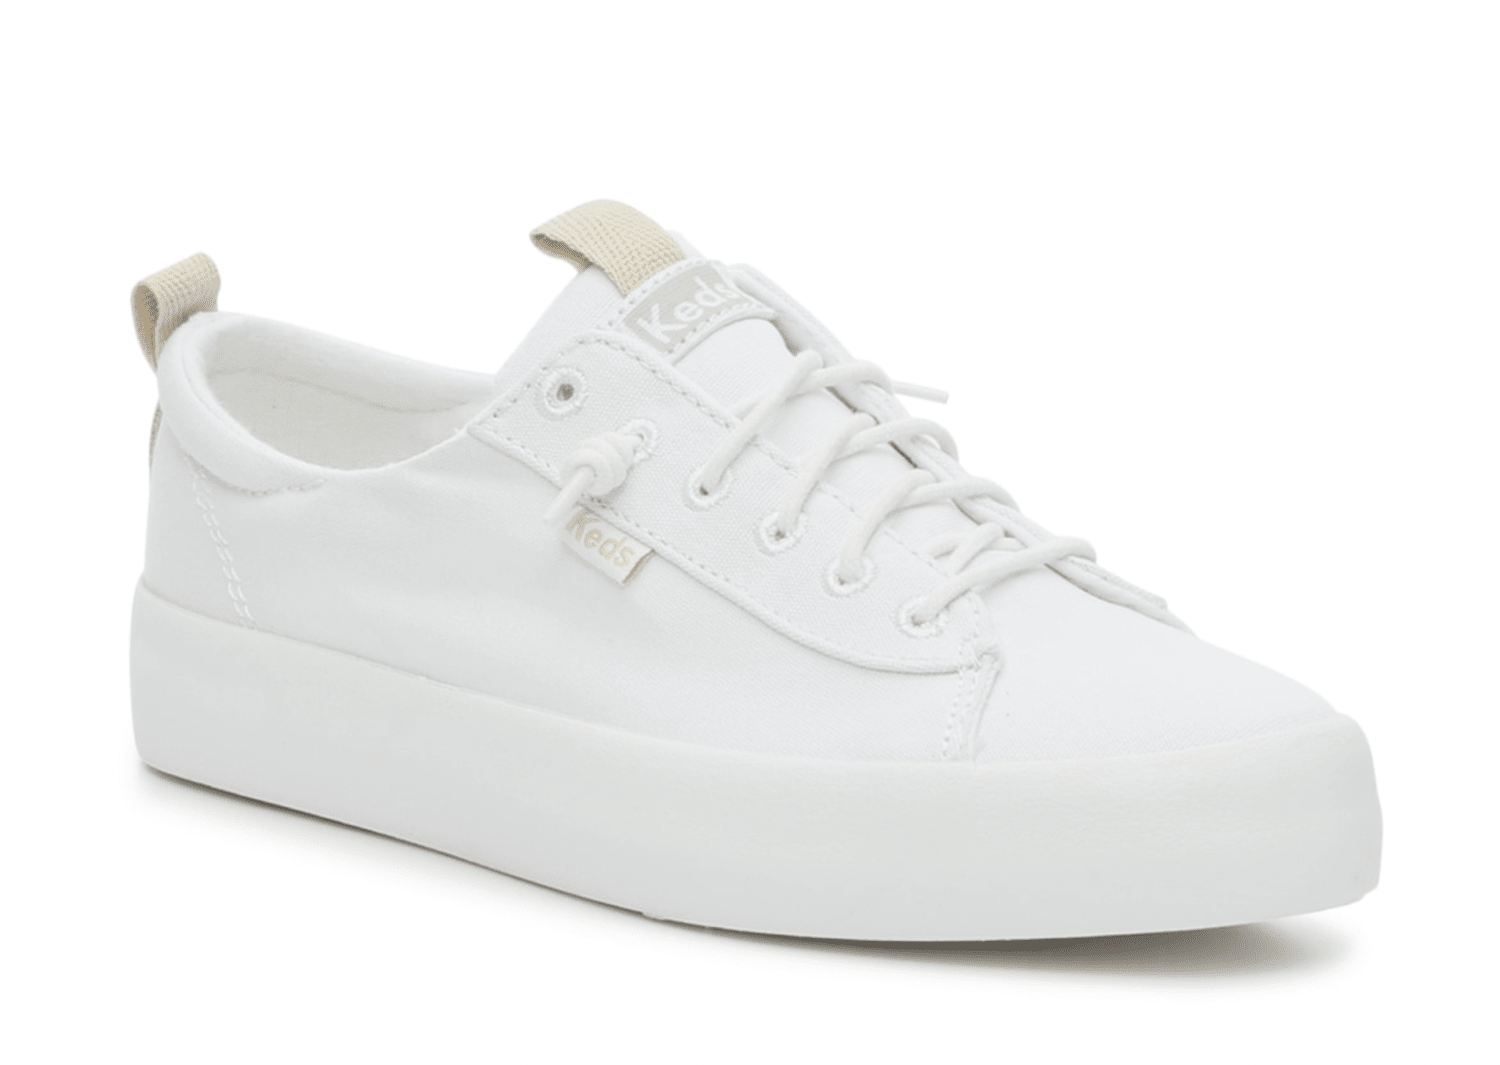 The best slip-on sneakers, according to experts